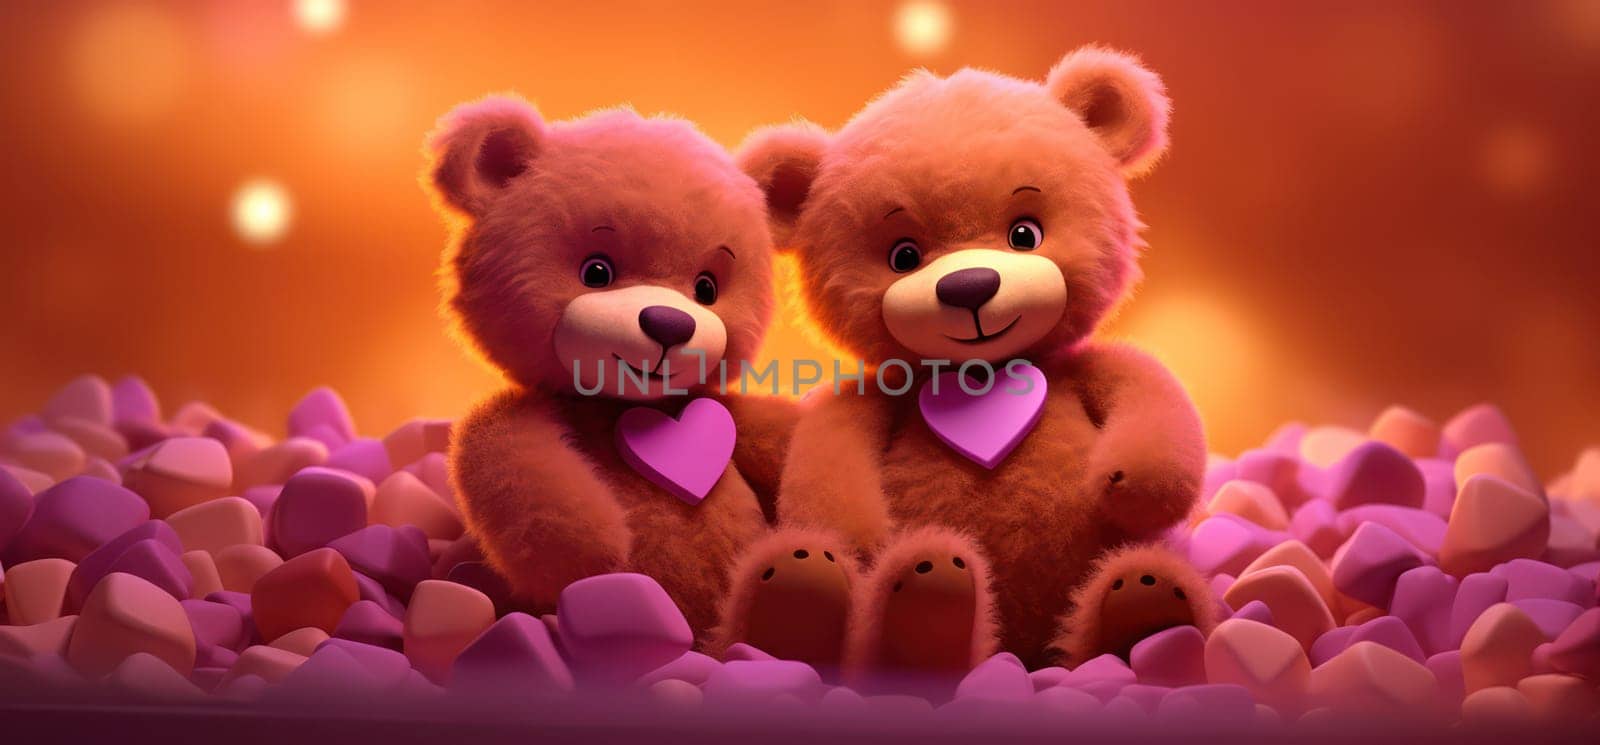 Cute Teddy Bear Love: Romantic Toy on Red Heart Background